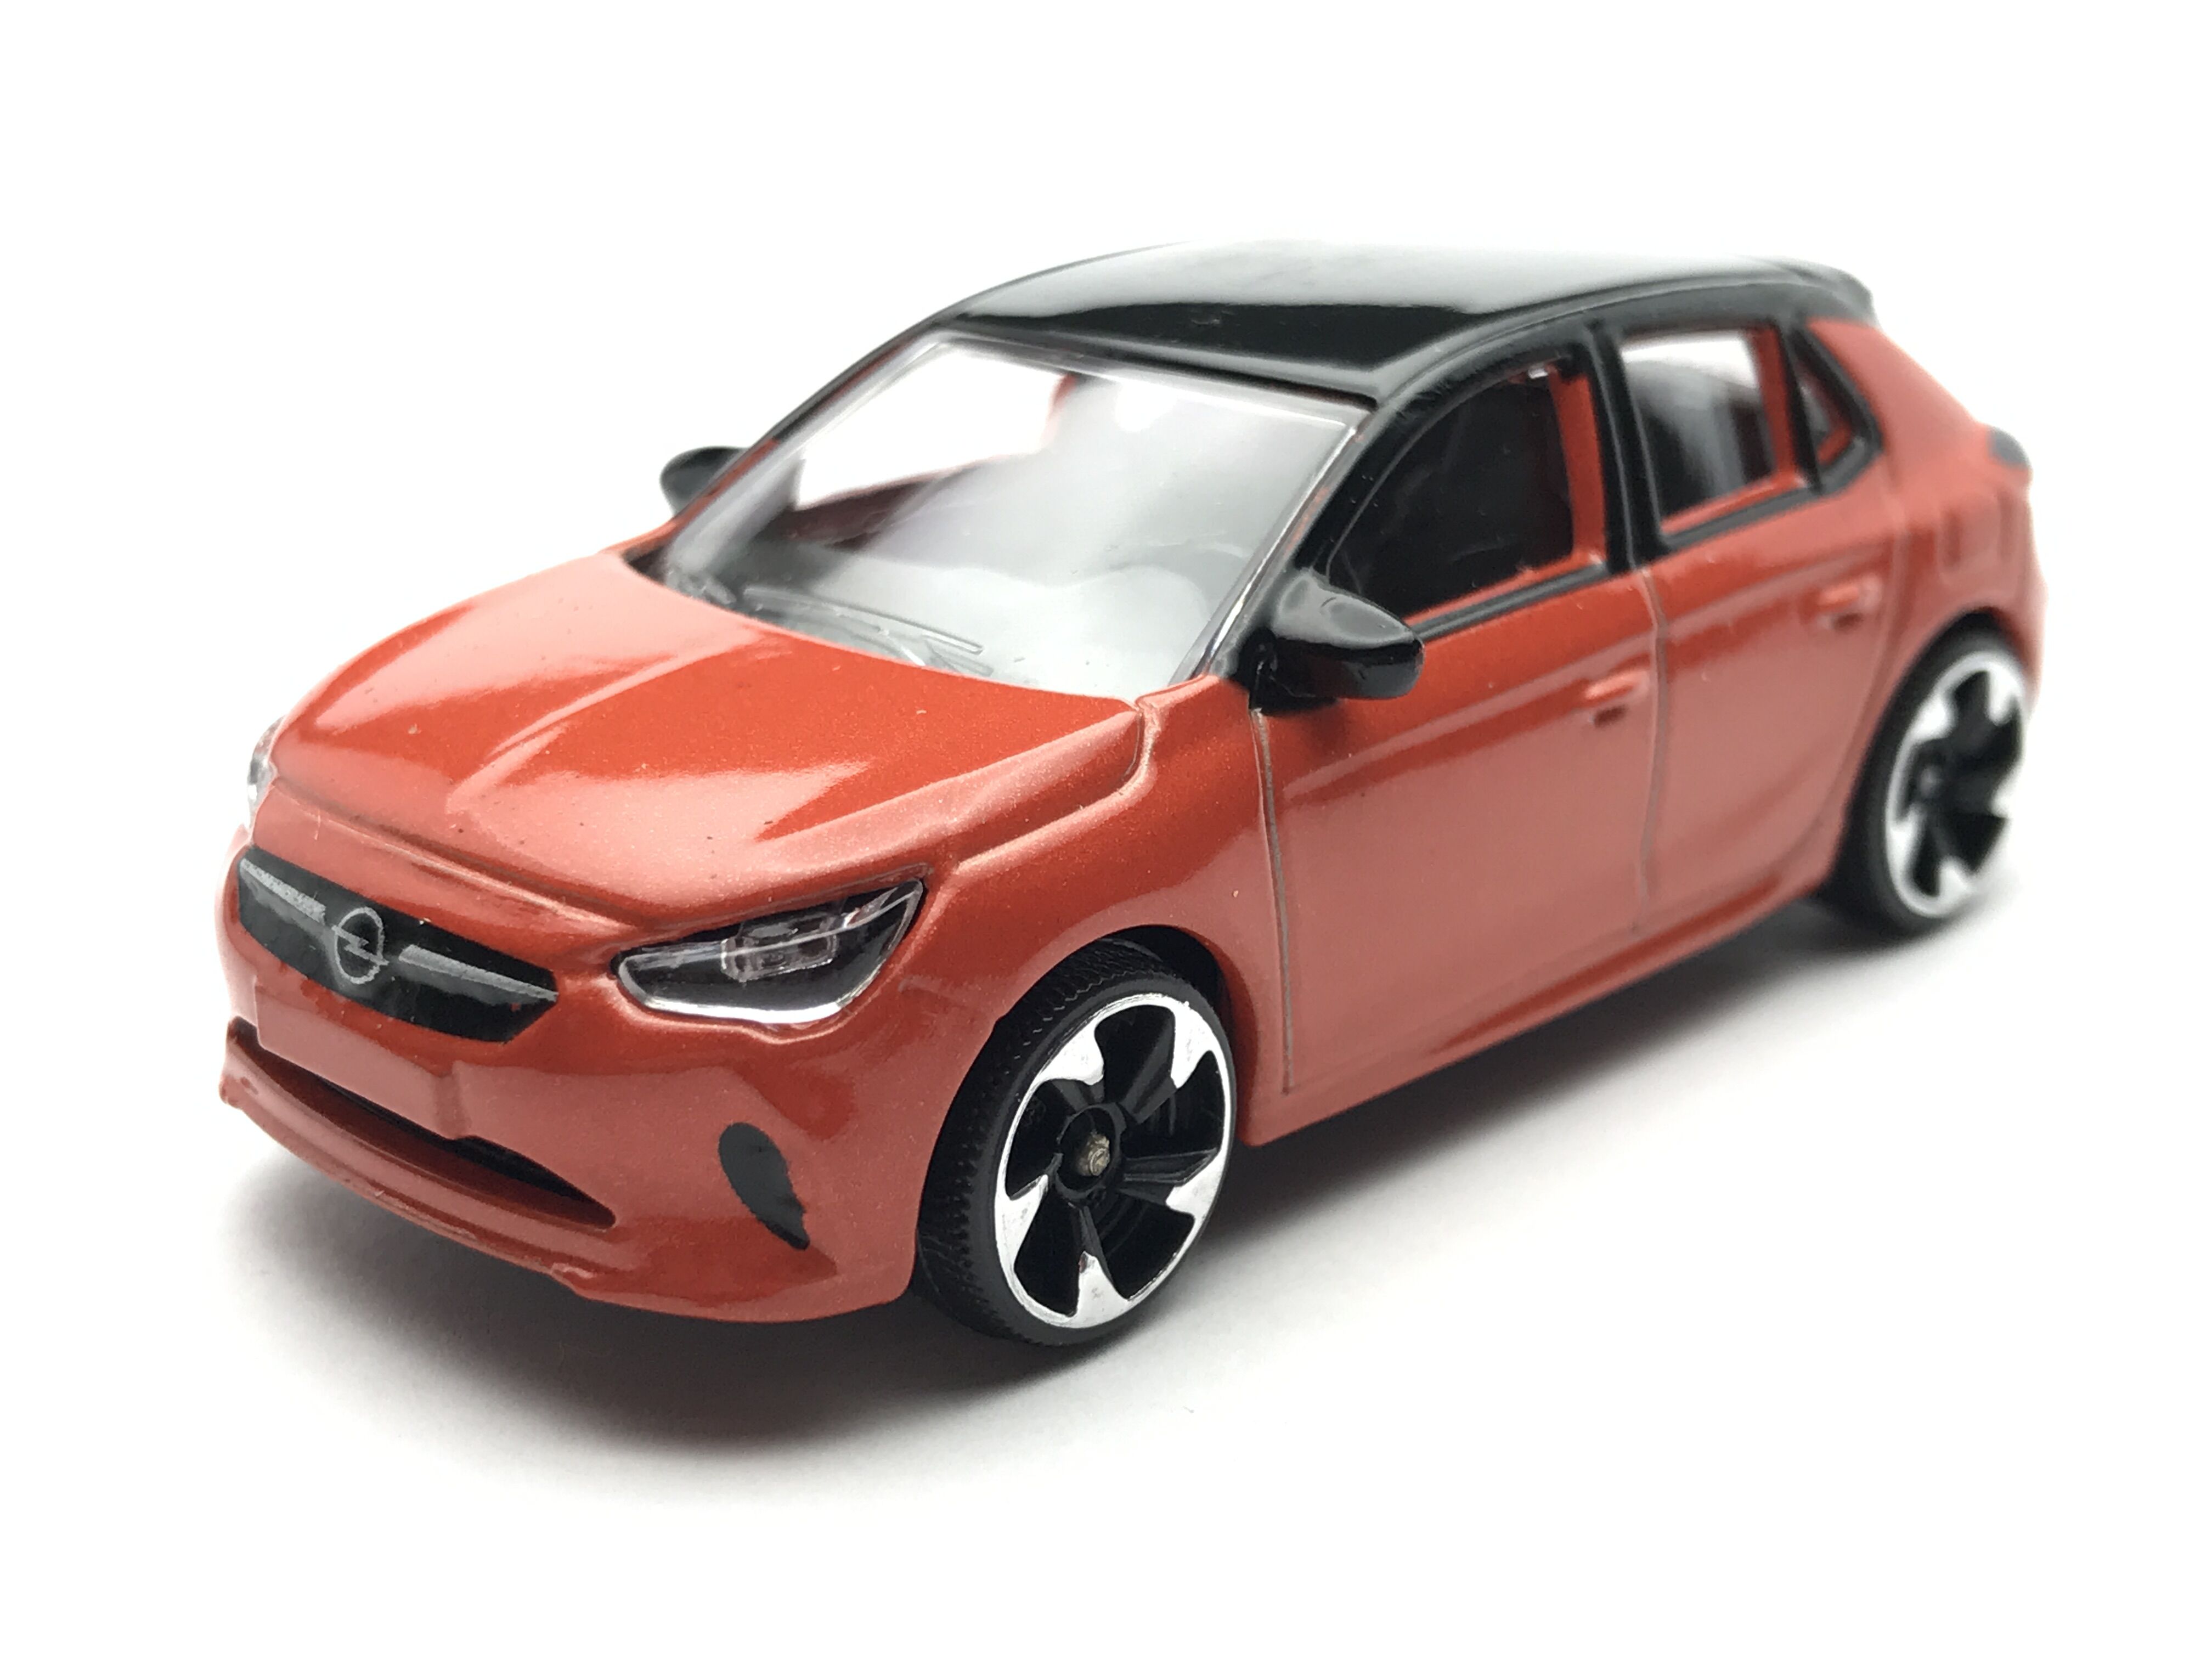 https://static.wikia.nocookie.net/majorette_model_cars/images/9/90/Opel_Corsa_power_orange_2019_202C.jpg/revision/latest/scale-to-width-down/4032?cb=20200605154747